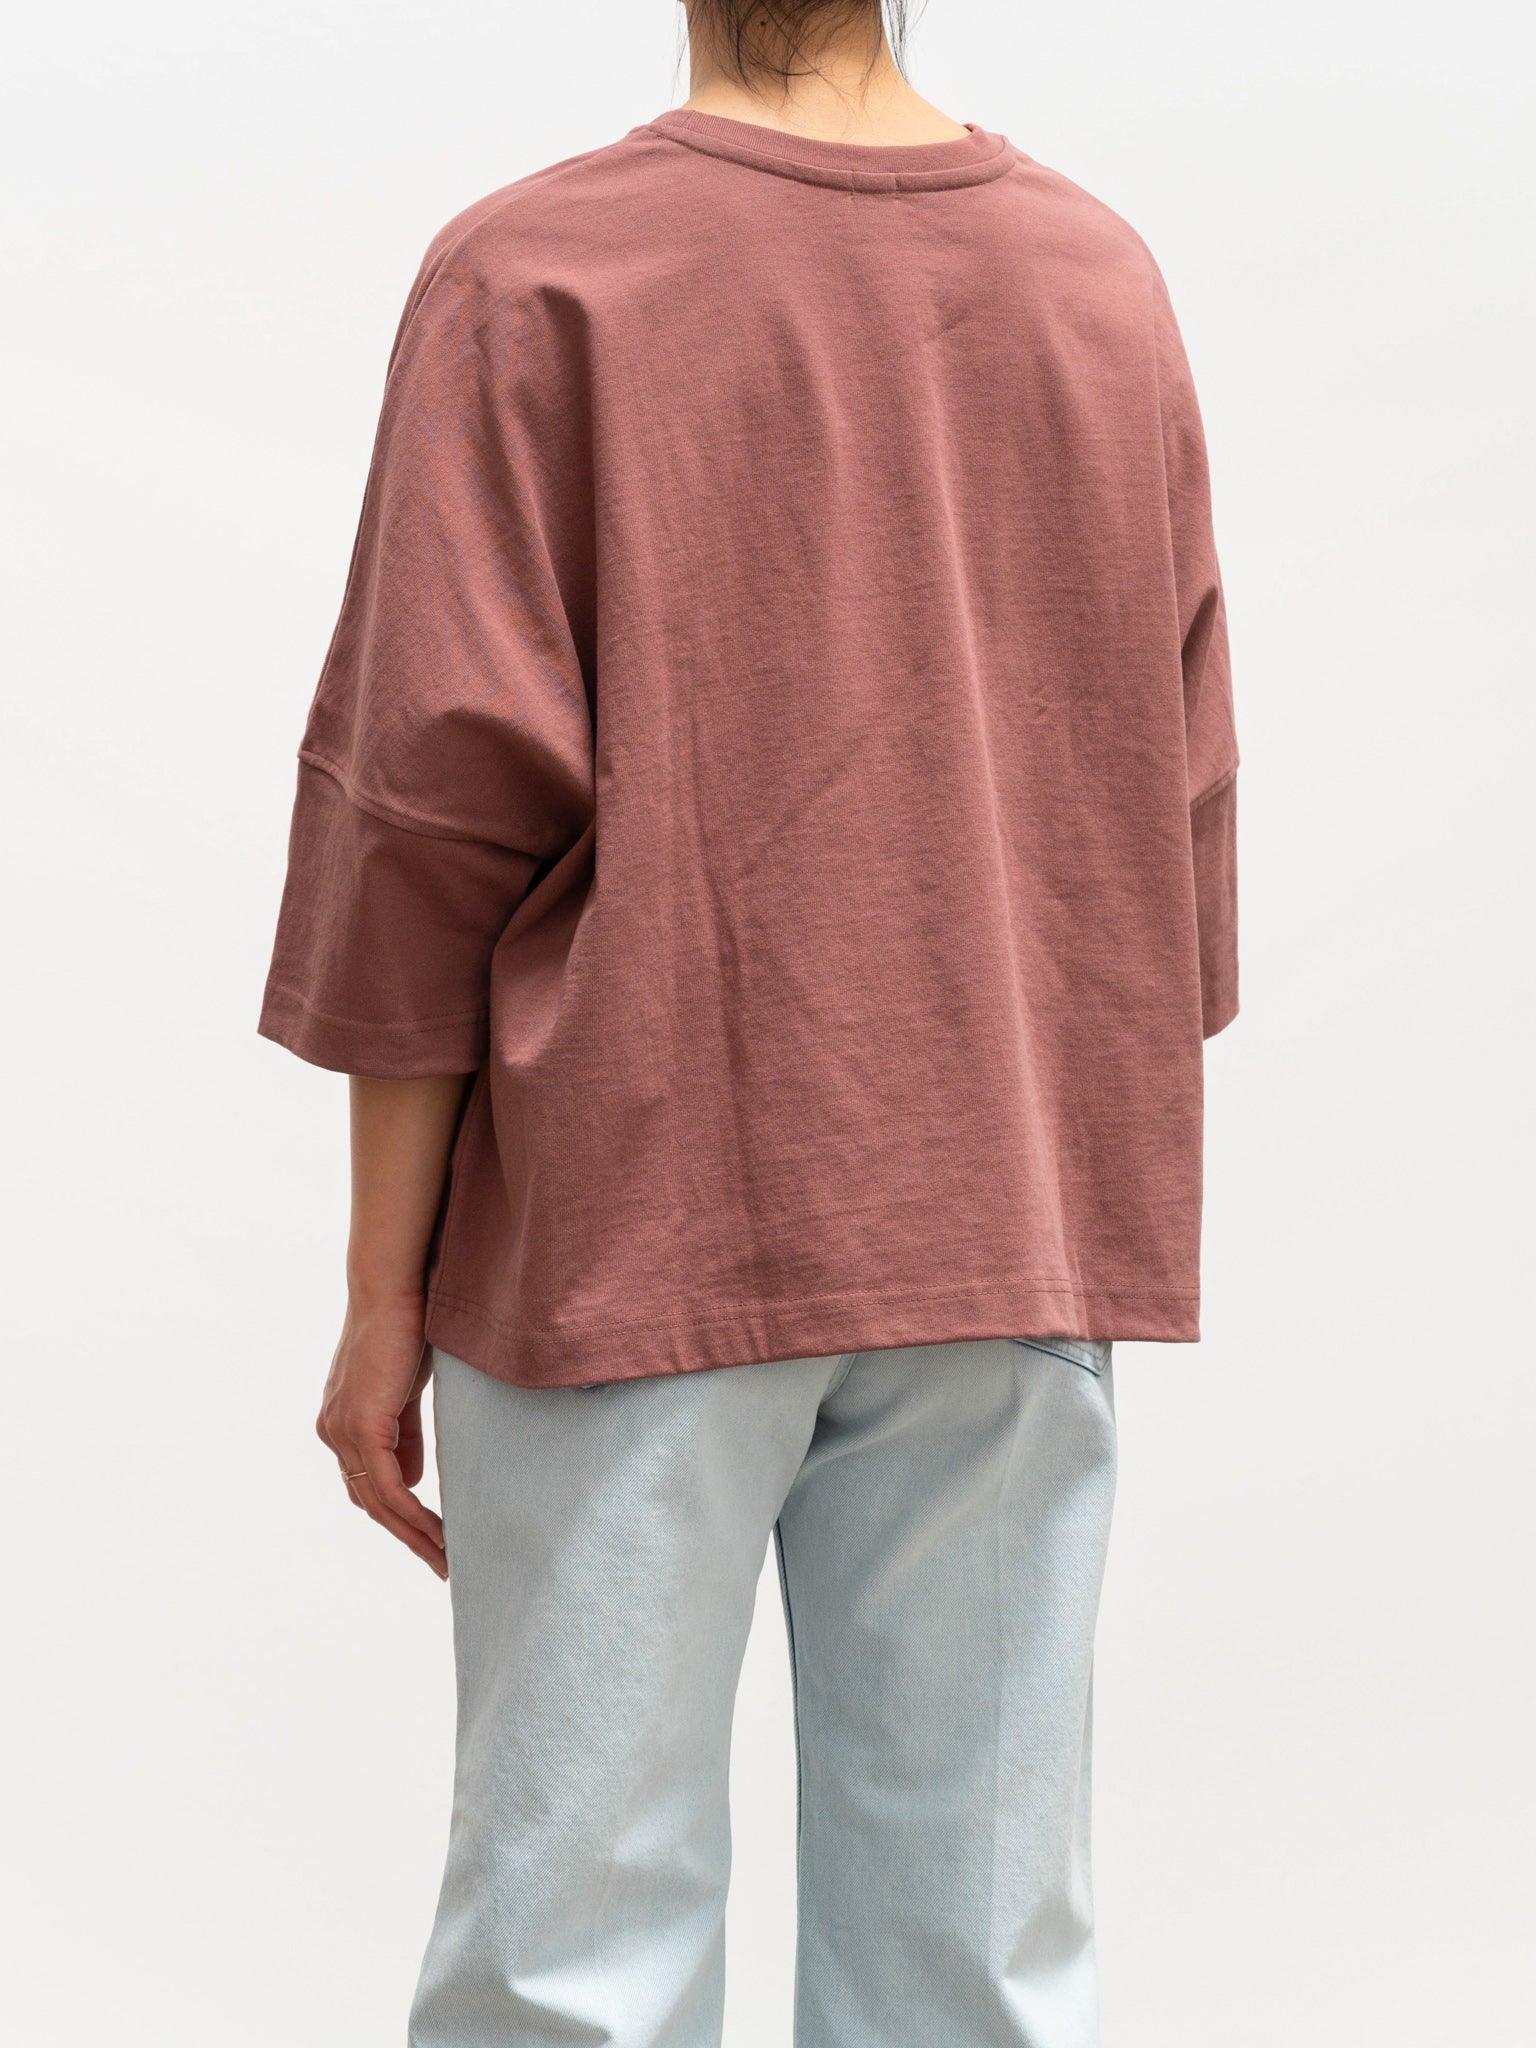 Namu Shop - Ichi Antiquites Relaxed Pullover Top - Mocha Red